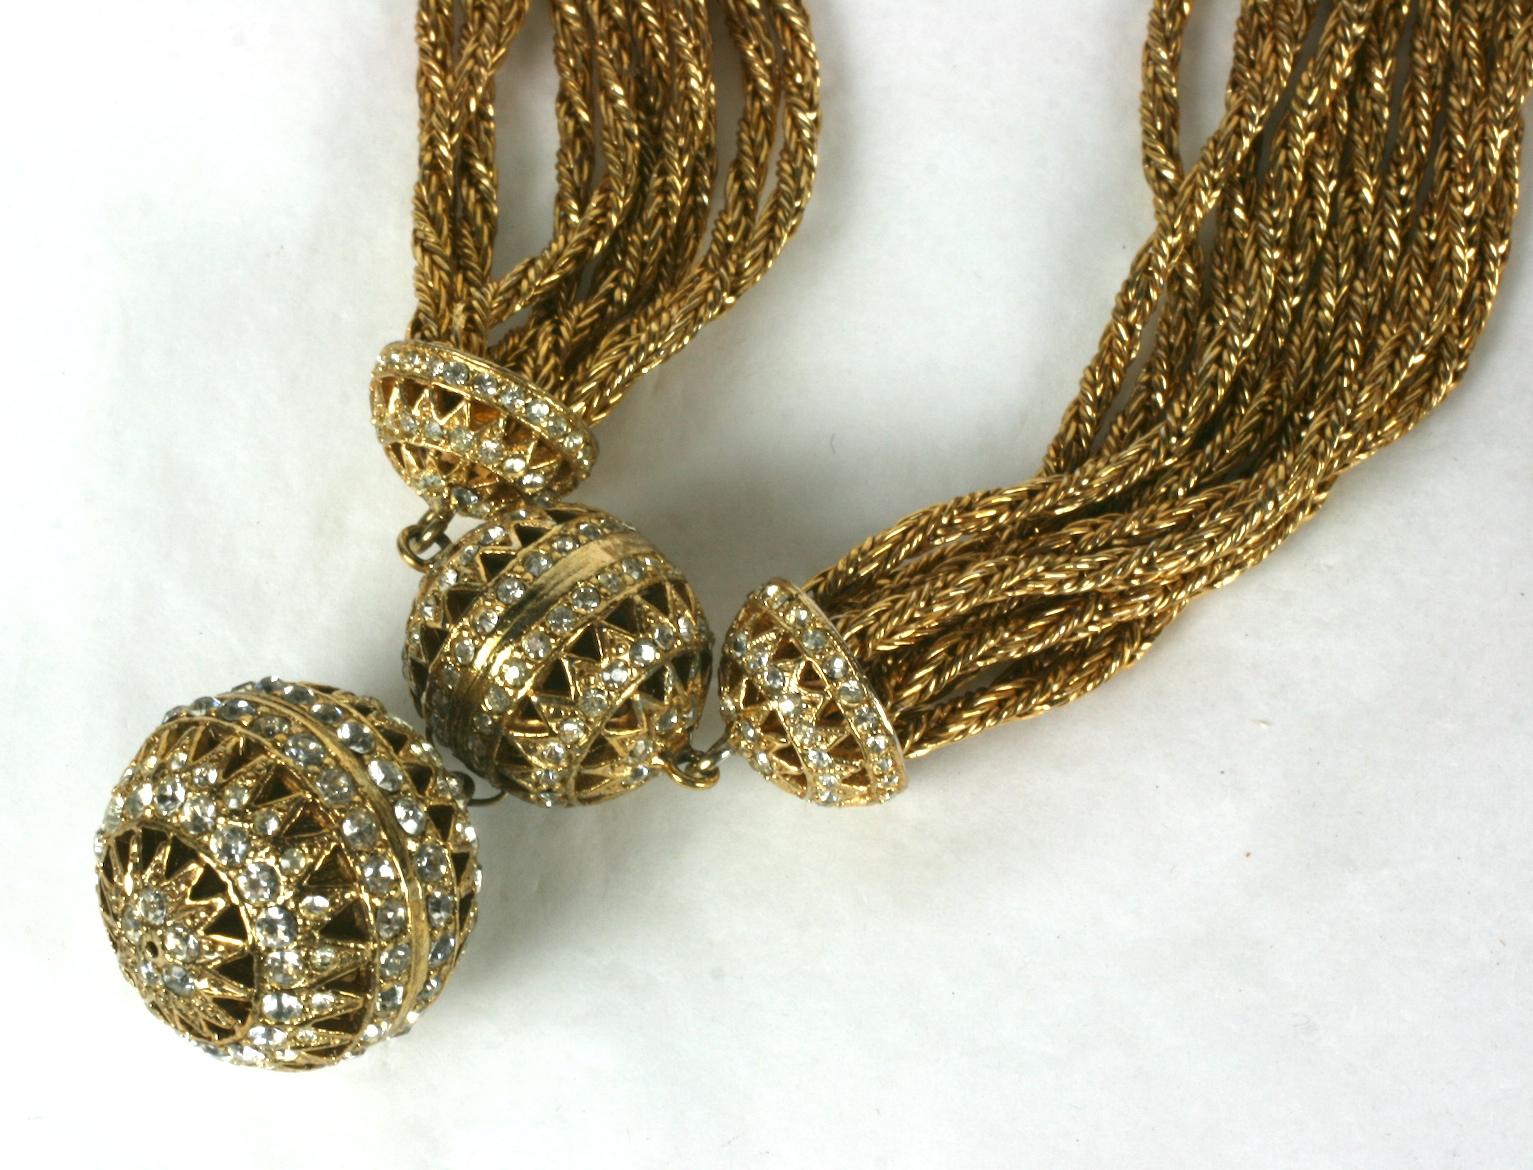 Elegant sautoir of Gilt Fox Chain and Pave Ball Stations from the 1960's. Beautifully crafted with pierced balls accented with crystal rhinestones with central focal drop. 
High quality faux jewelry likely manufactured by Nettie Rosenstein,